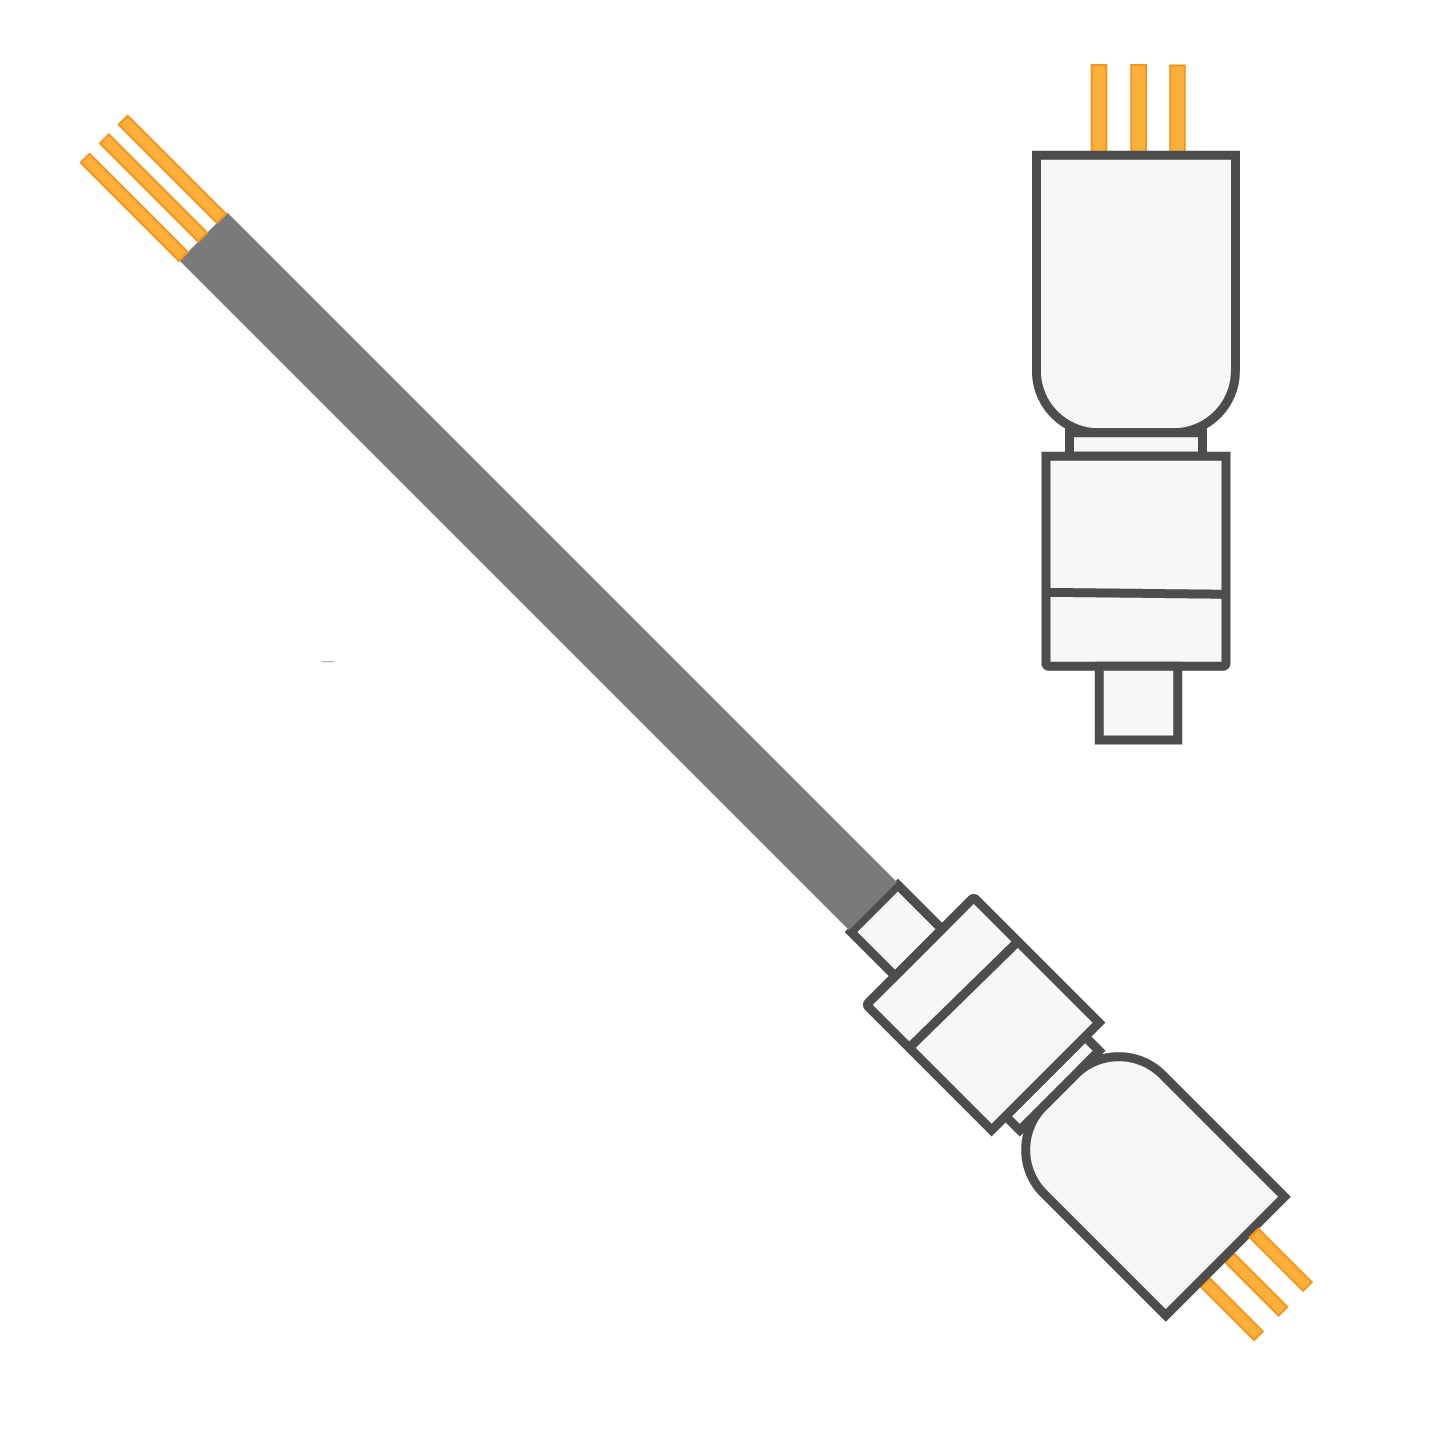 3 Channel Cable 335-000 With Spring